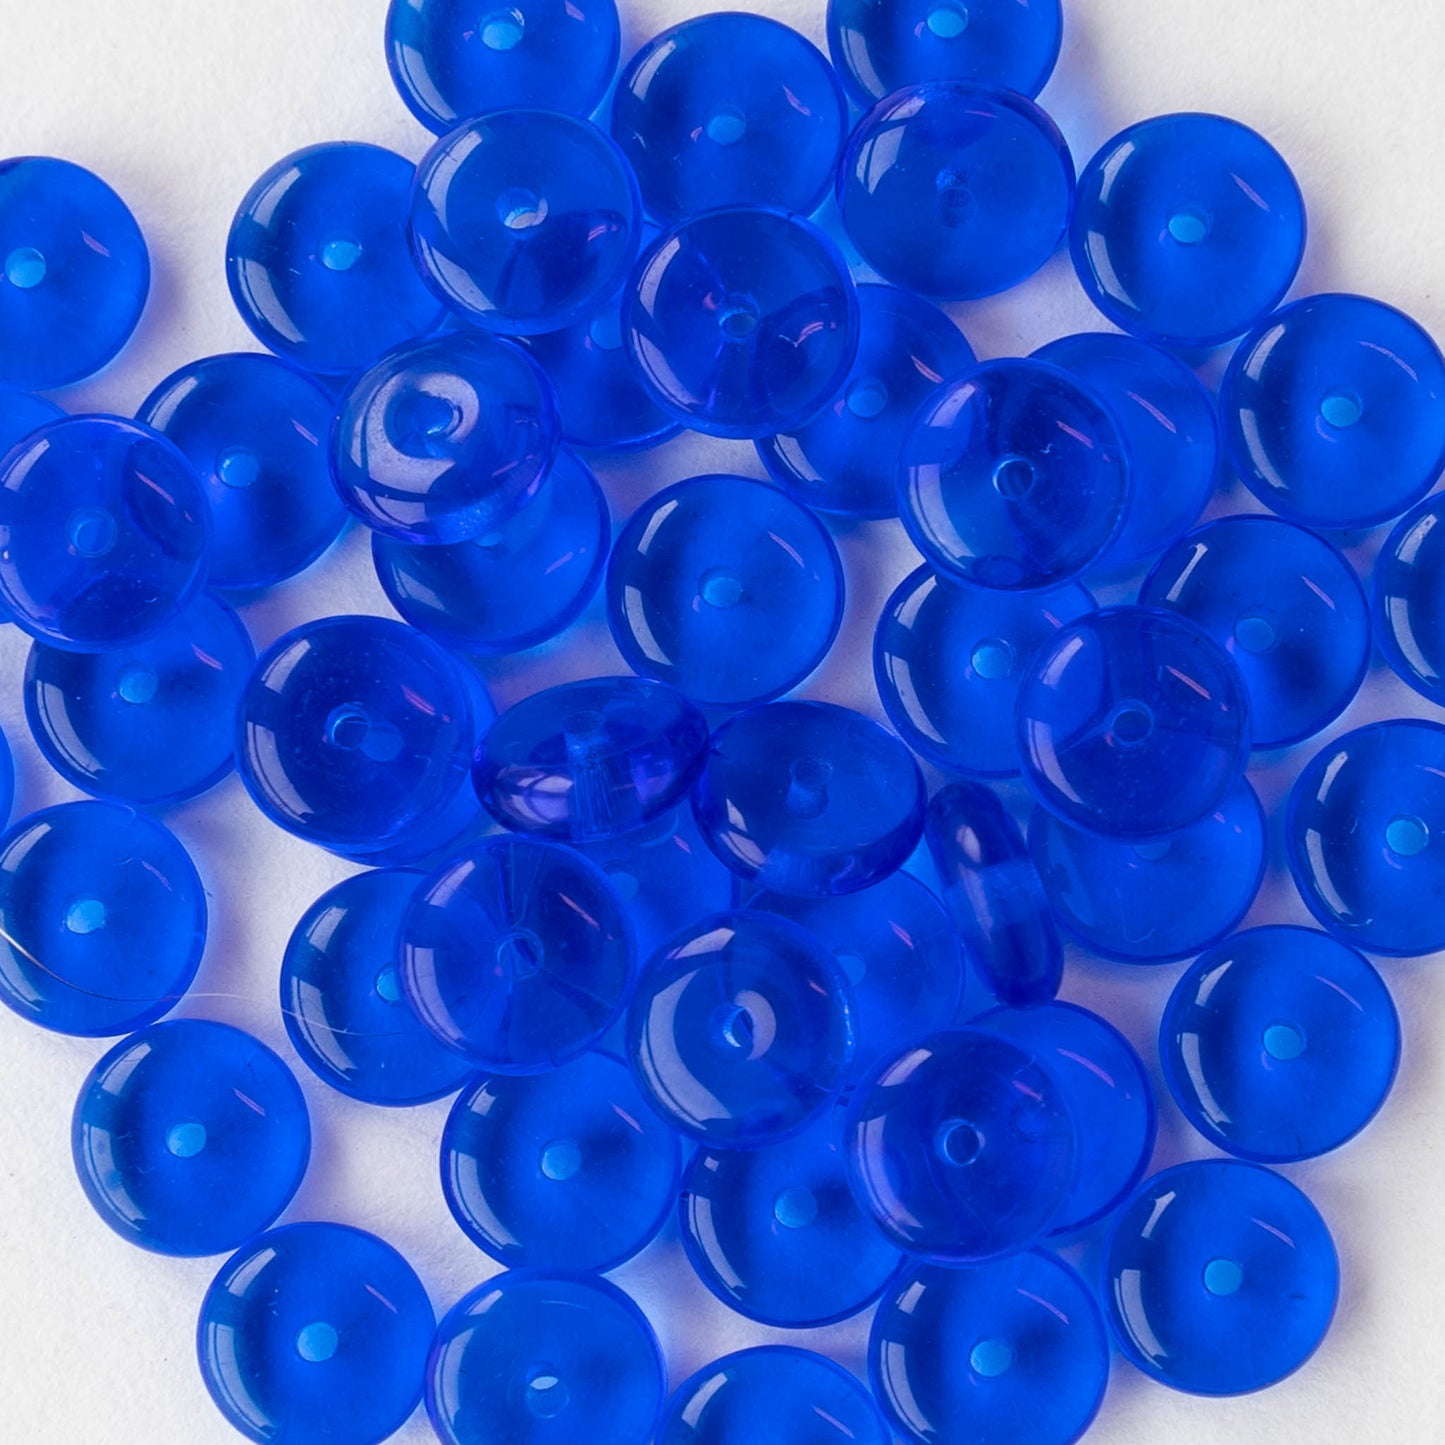 6mm Rondelle Beads - Royal Blue  - 100 Beads